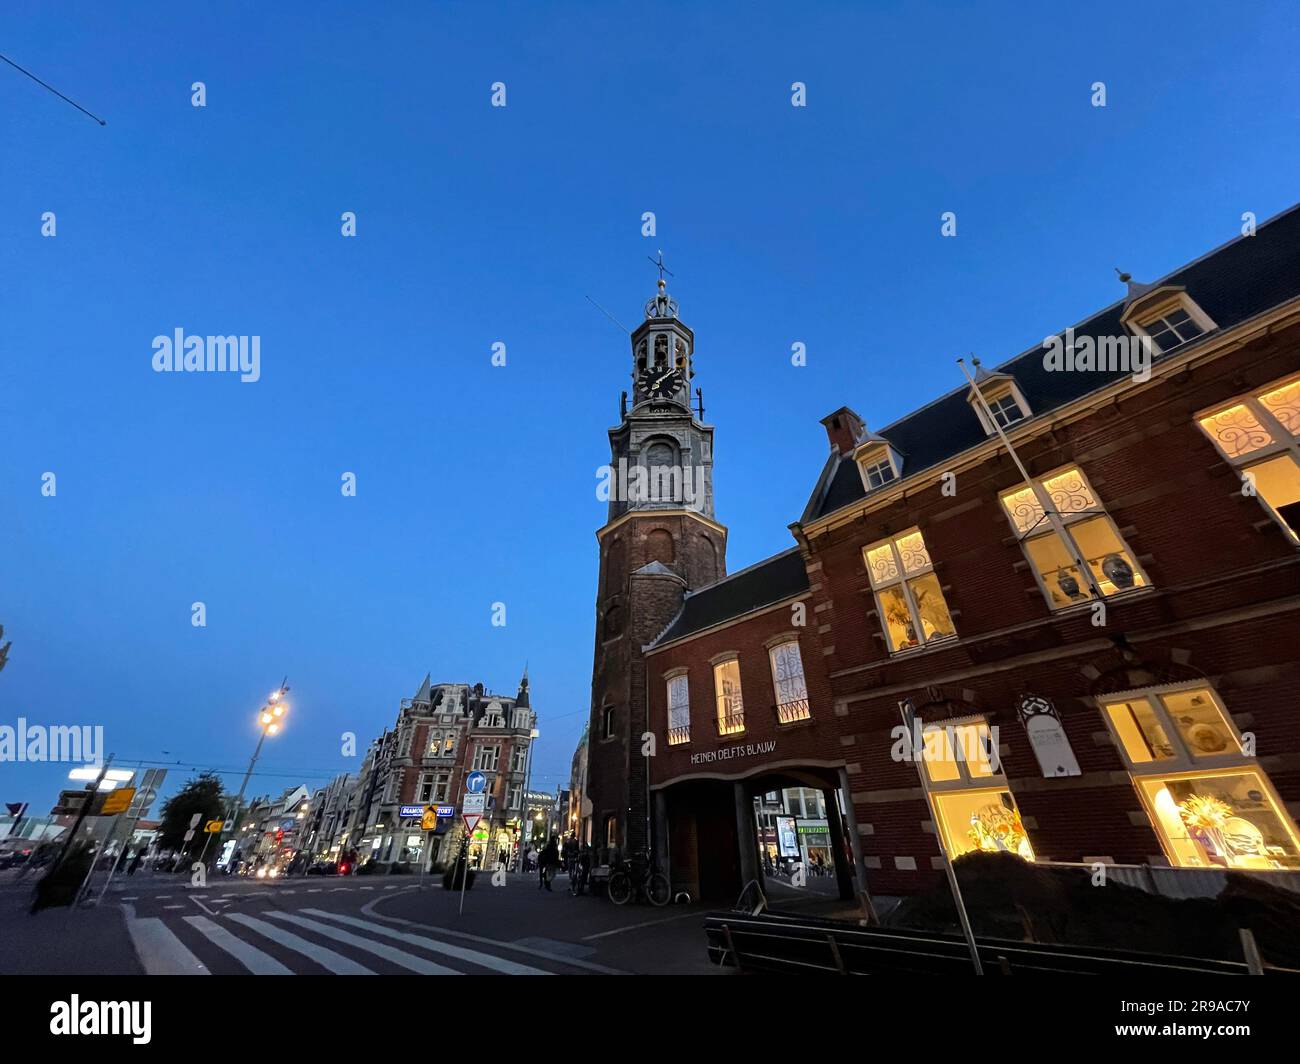 Amsterdam, NL - October 12, 2021: The Munttoren, Mint Tower is a tower in Amsterdam, the Netherlands. It stands on the busy Muntplein square, where th Stock Photo